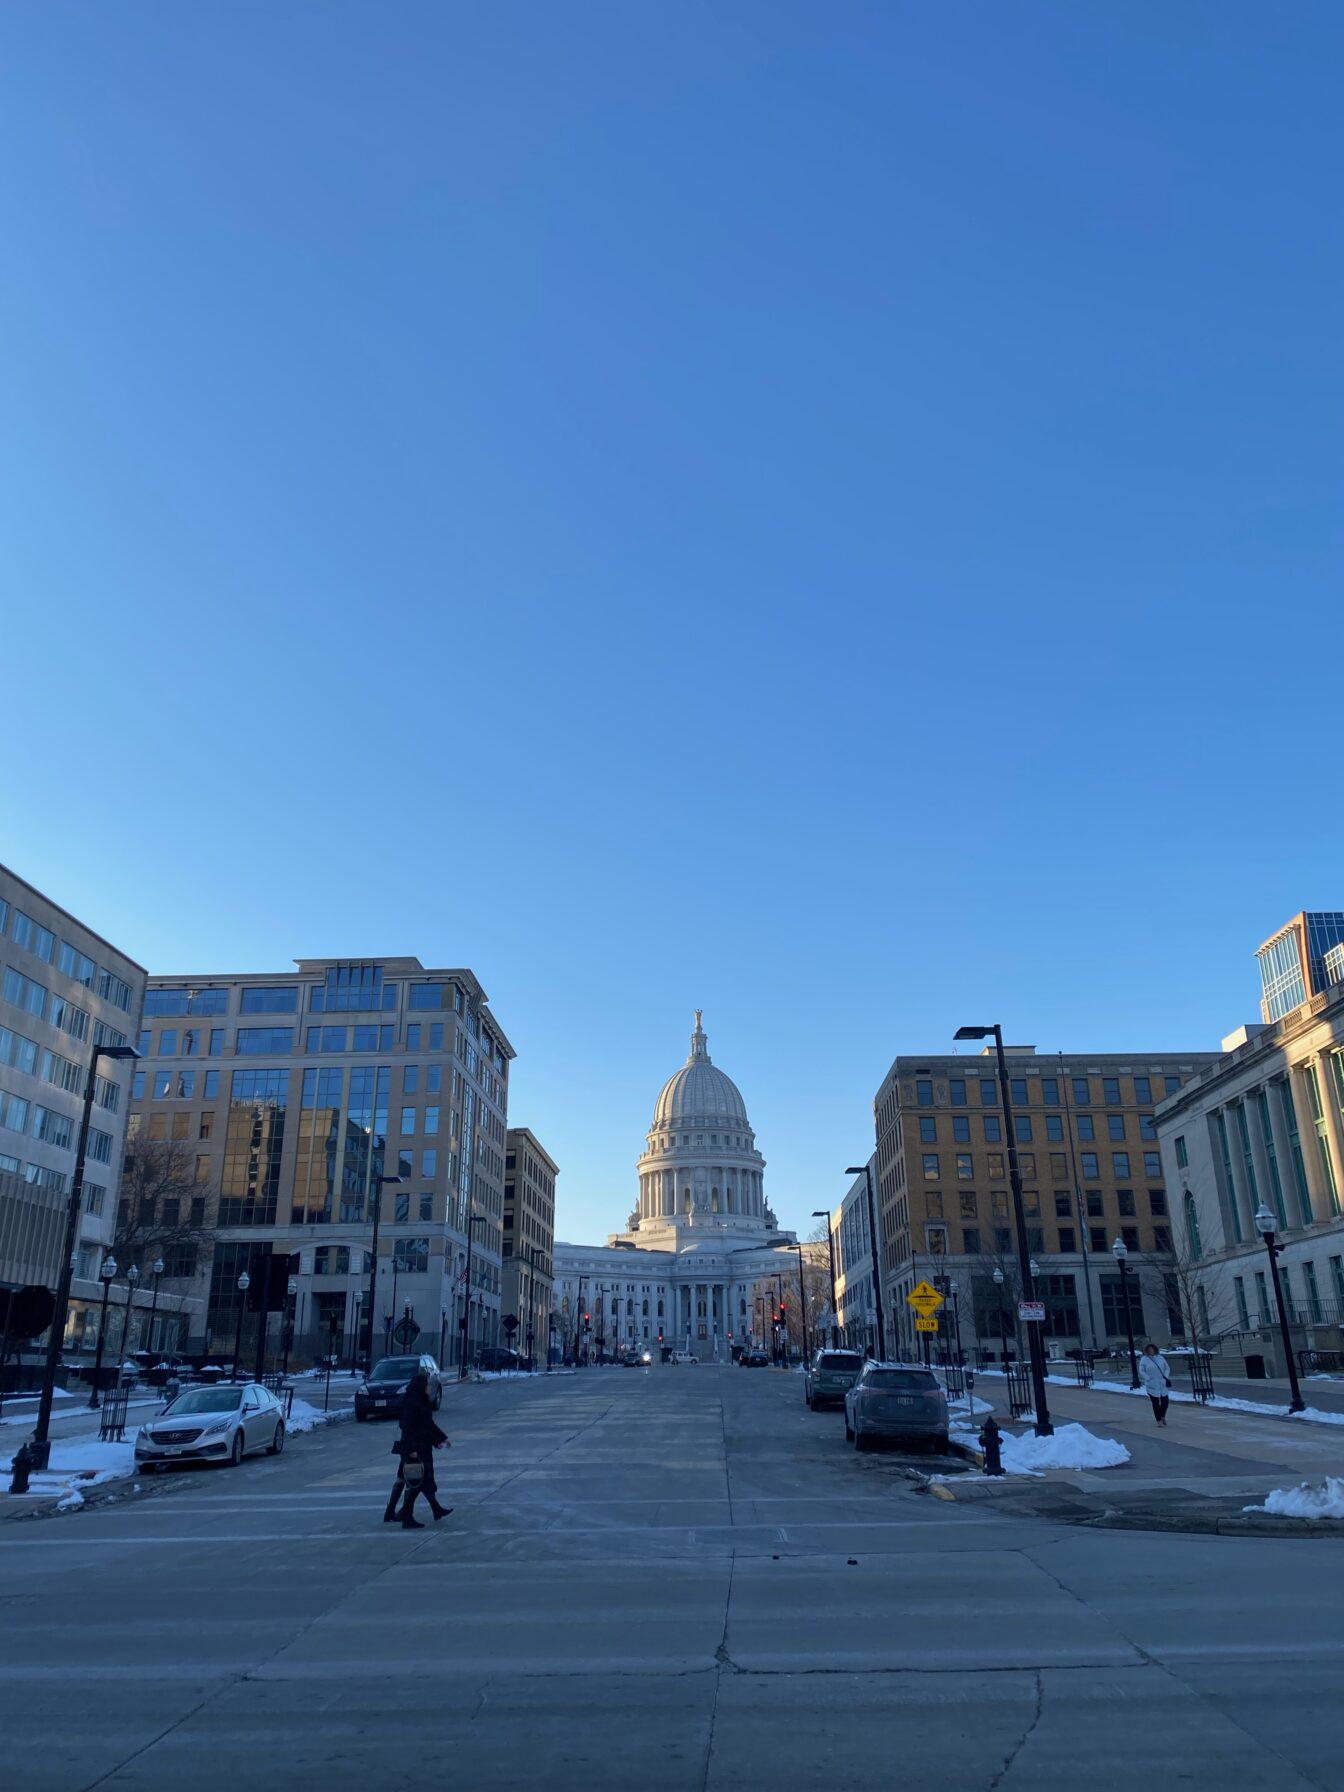 Racial disparities in employment severe in Madison, report says